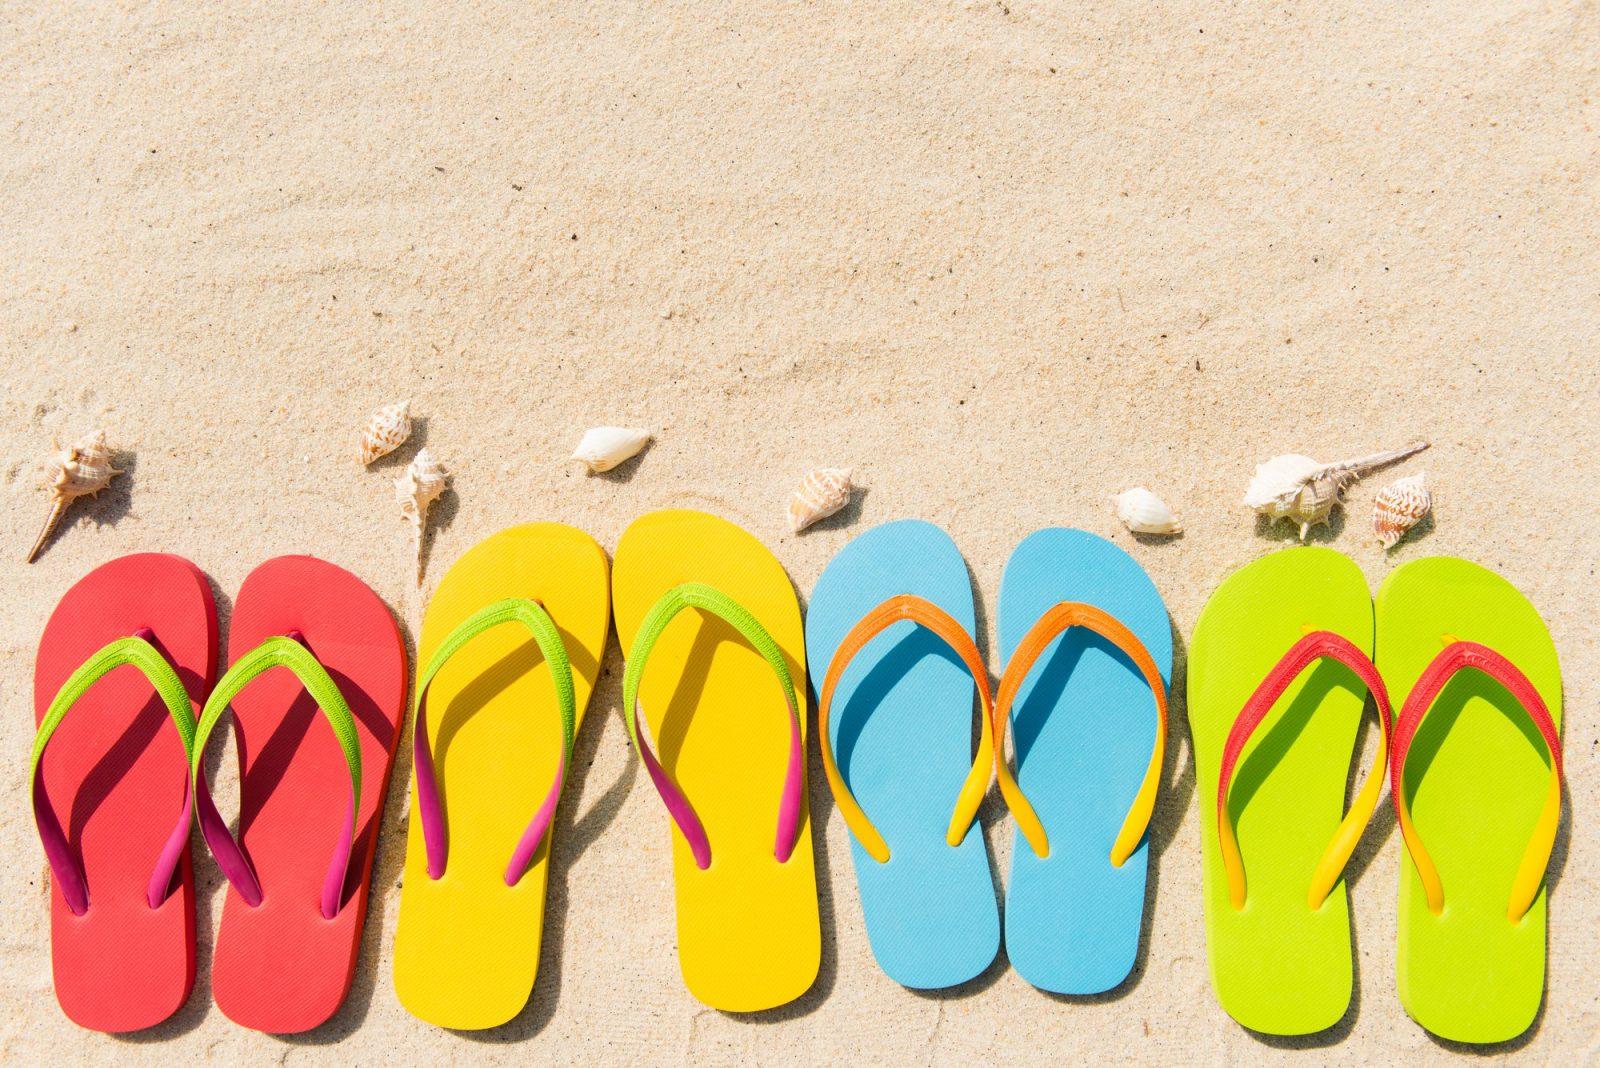 Four pairs of flip flops in a row on beach